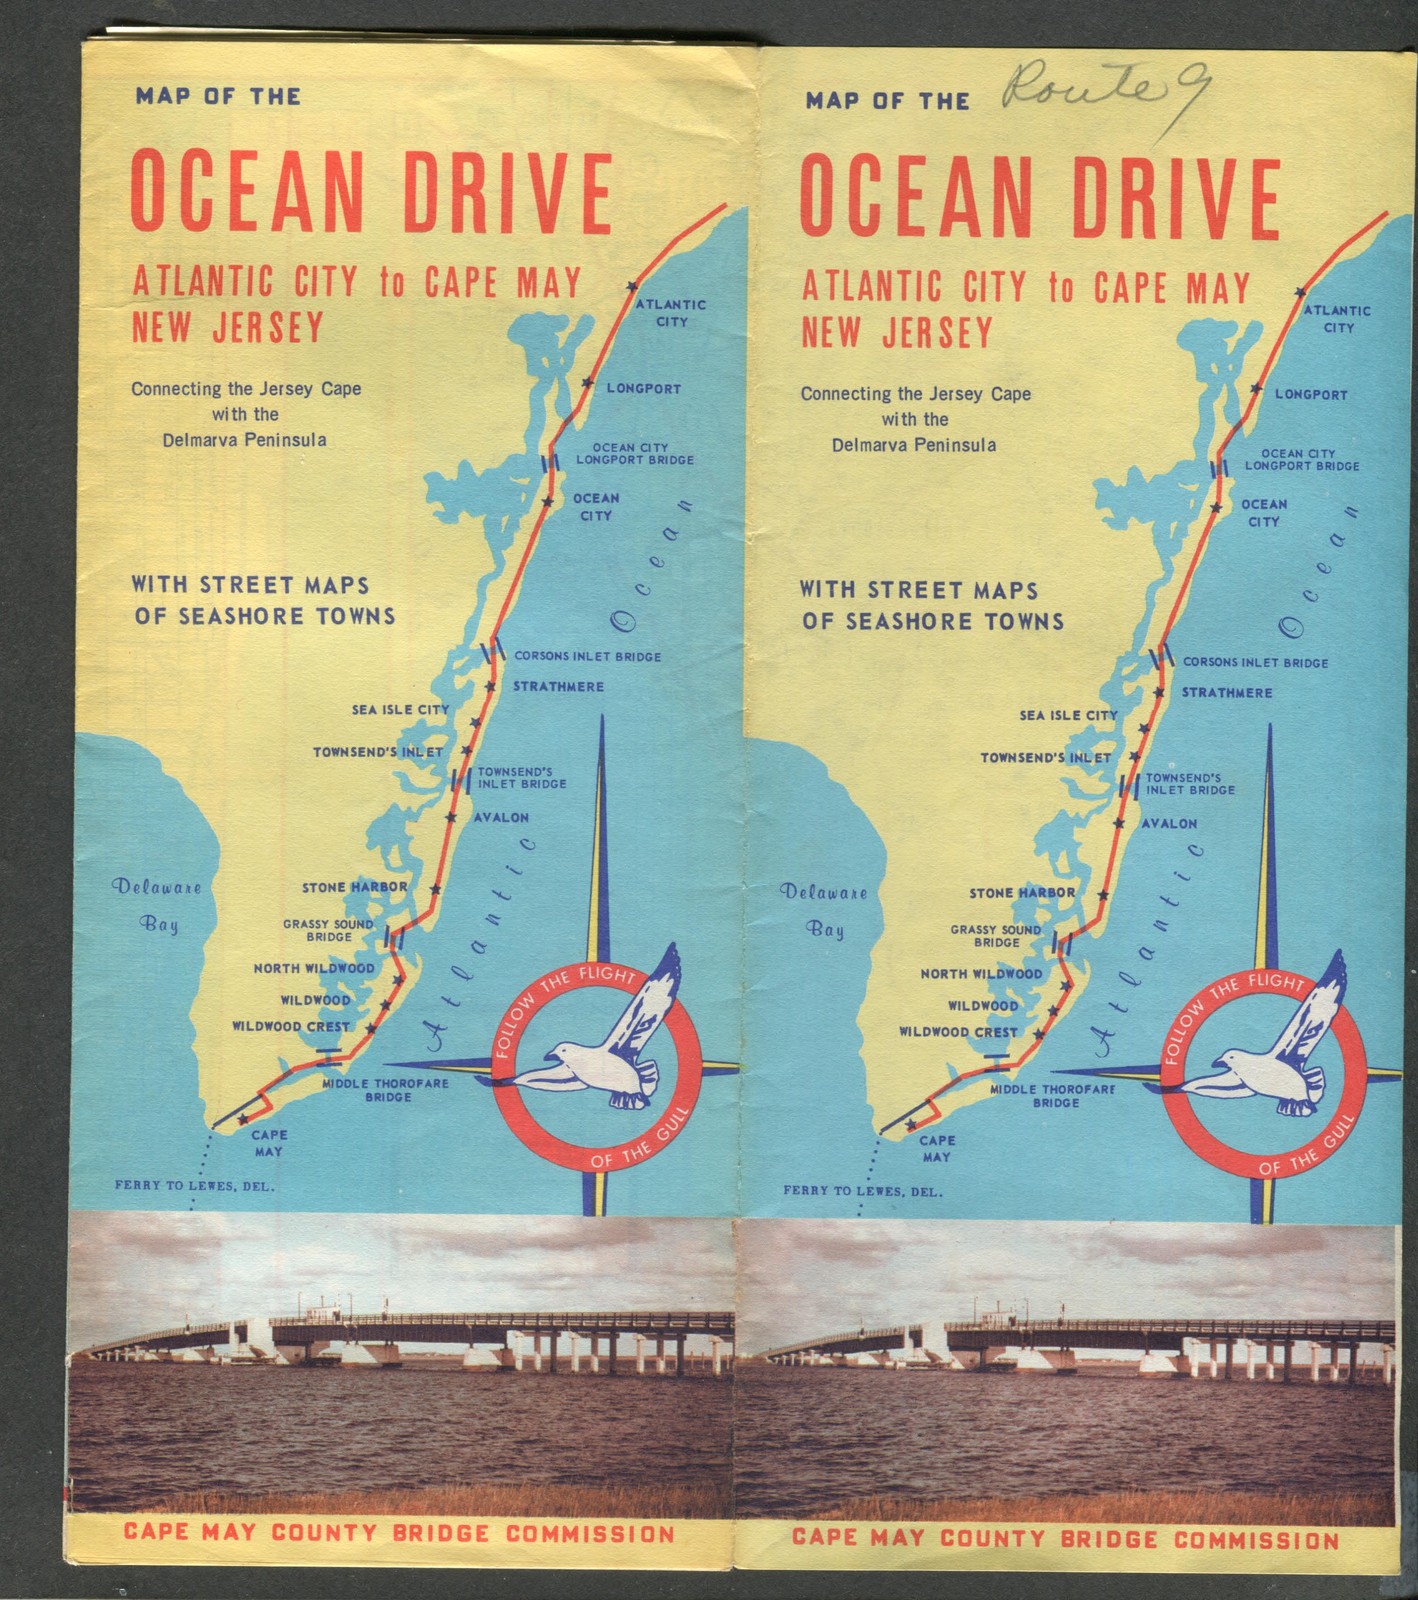 Primary image for 1967 Map of the Ocean Drive from Atlantic City to Cap May, New Jersey